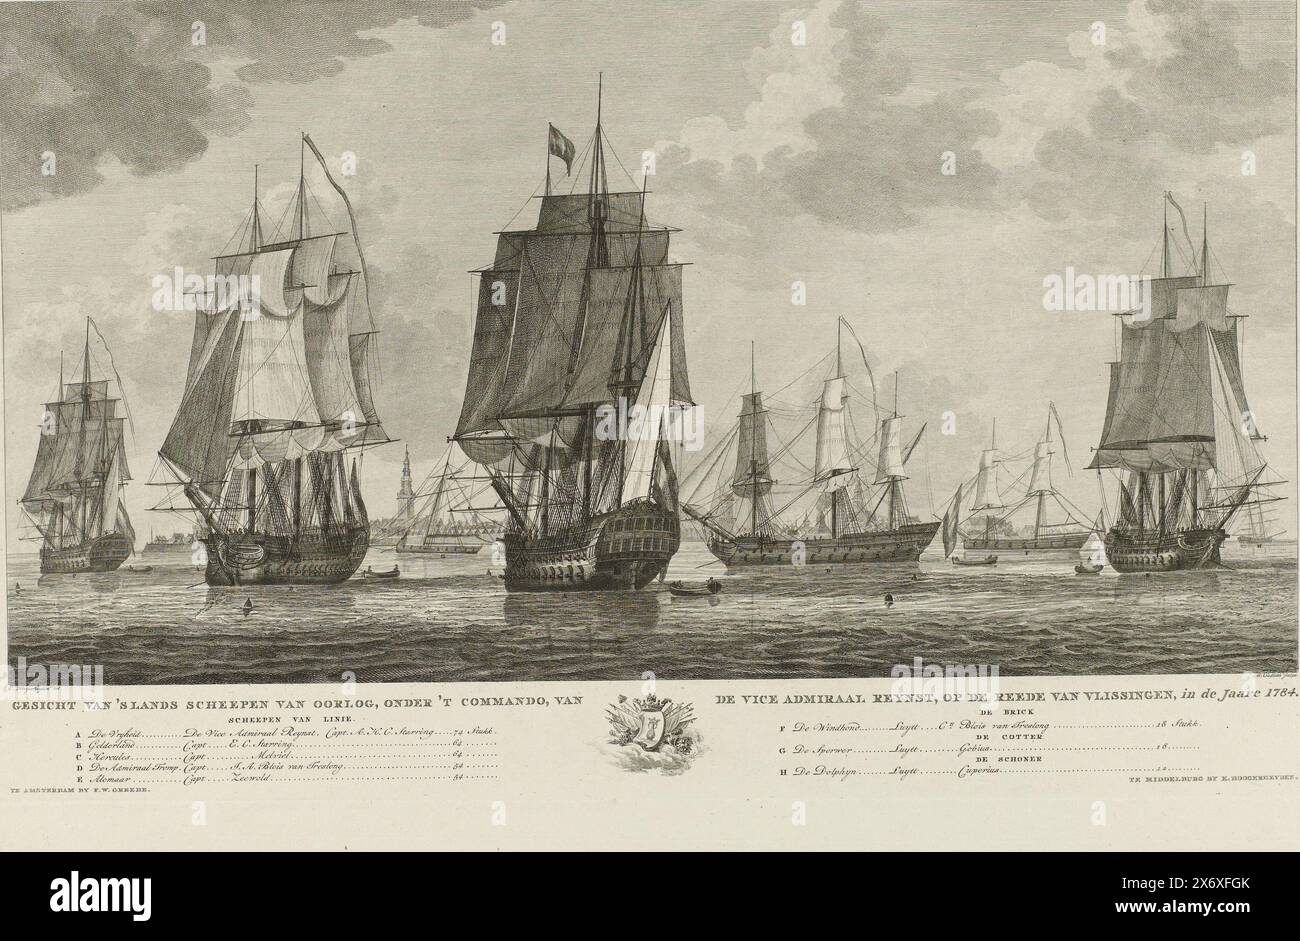 Dutch war fleet on the roadstead of Vlissingen, 1784, View of the country's ships of war, under the command of Vice Admiral Reynst, on the roadstead of Vlissingen, in the year 1784 (title on object), View of the Dutch war fleet under the command of Vice Admiral Pieter Hendrik Reynst at the Flushing Roads, 1784. In the caption the coat of arms of Vlissingen in a trophy of arms and the legend A-H with the names of the ships and their captains and numbers of pieces., print, print maker: Mathias de Sallieth, (mentioned on object), after drawing by: Engel Hoogerheyden, (mentioned on object Stock Photo